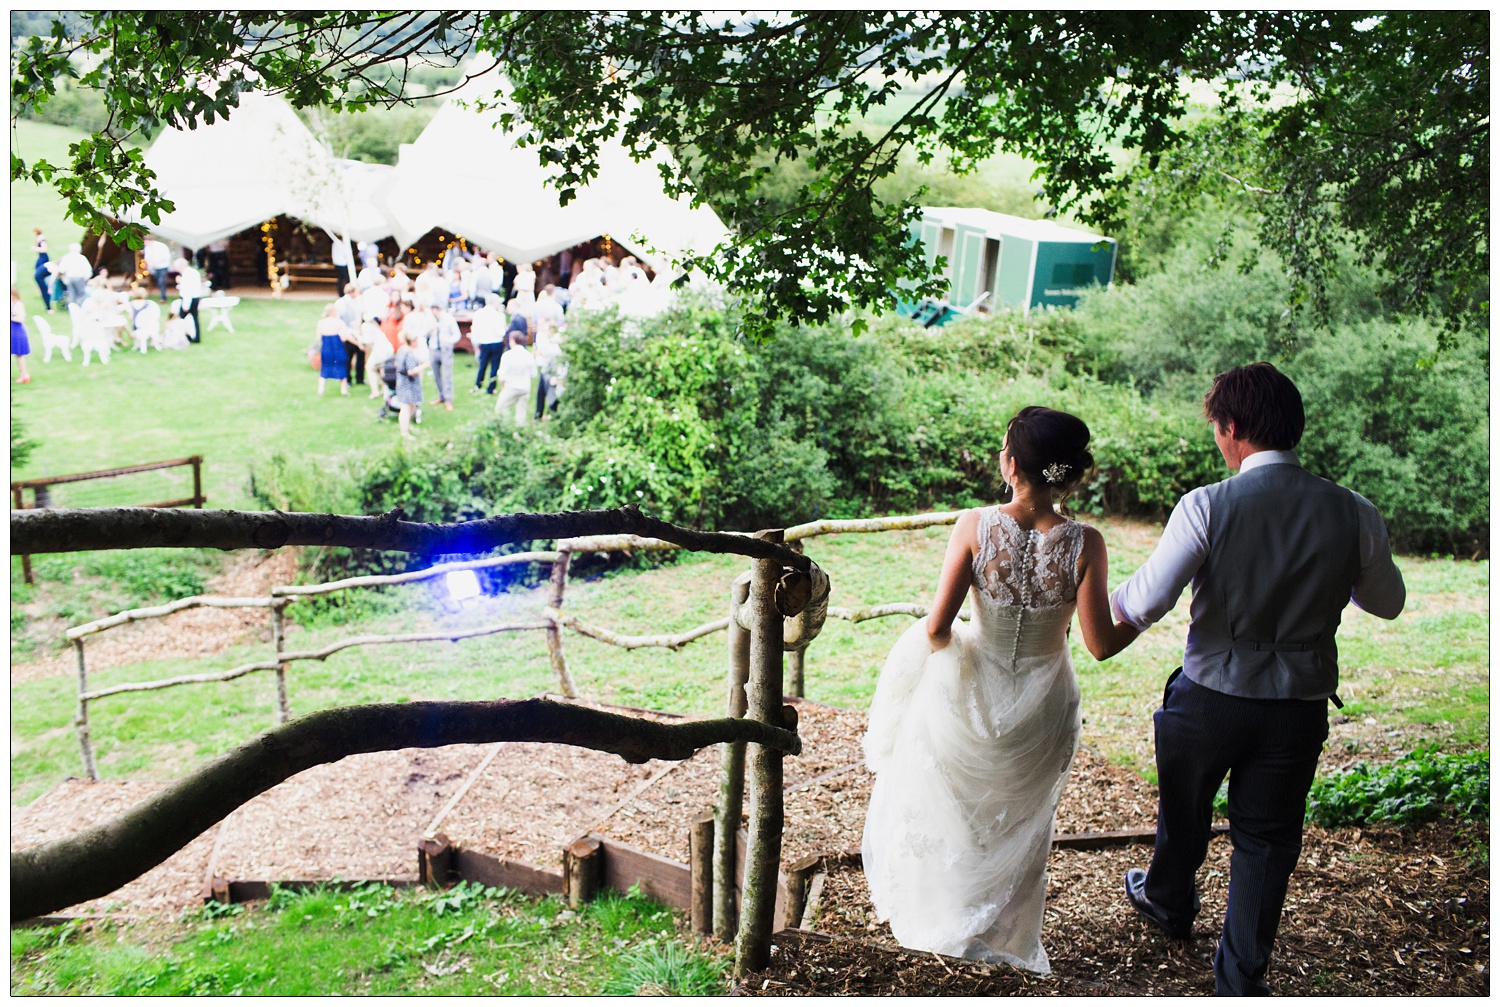 The bride and groom walk down the wooden steps to the Tentipi, for their wedding reception. The guests are already down there.